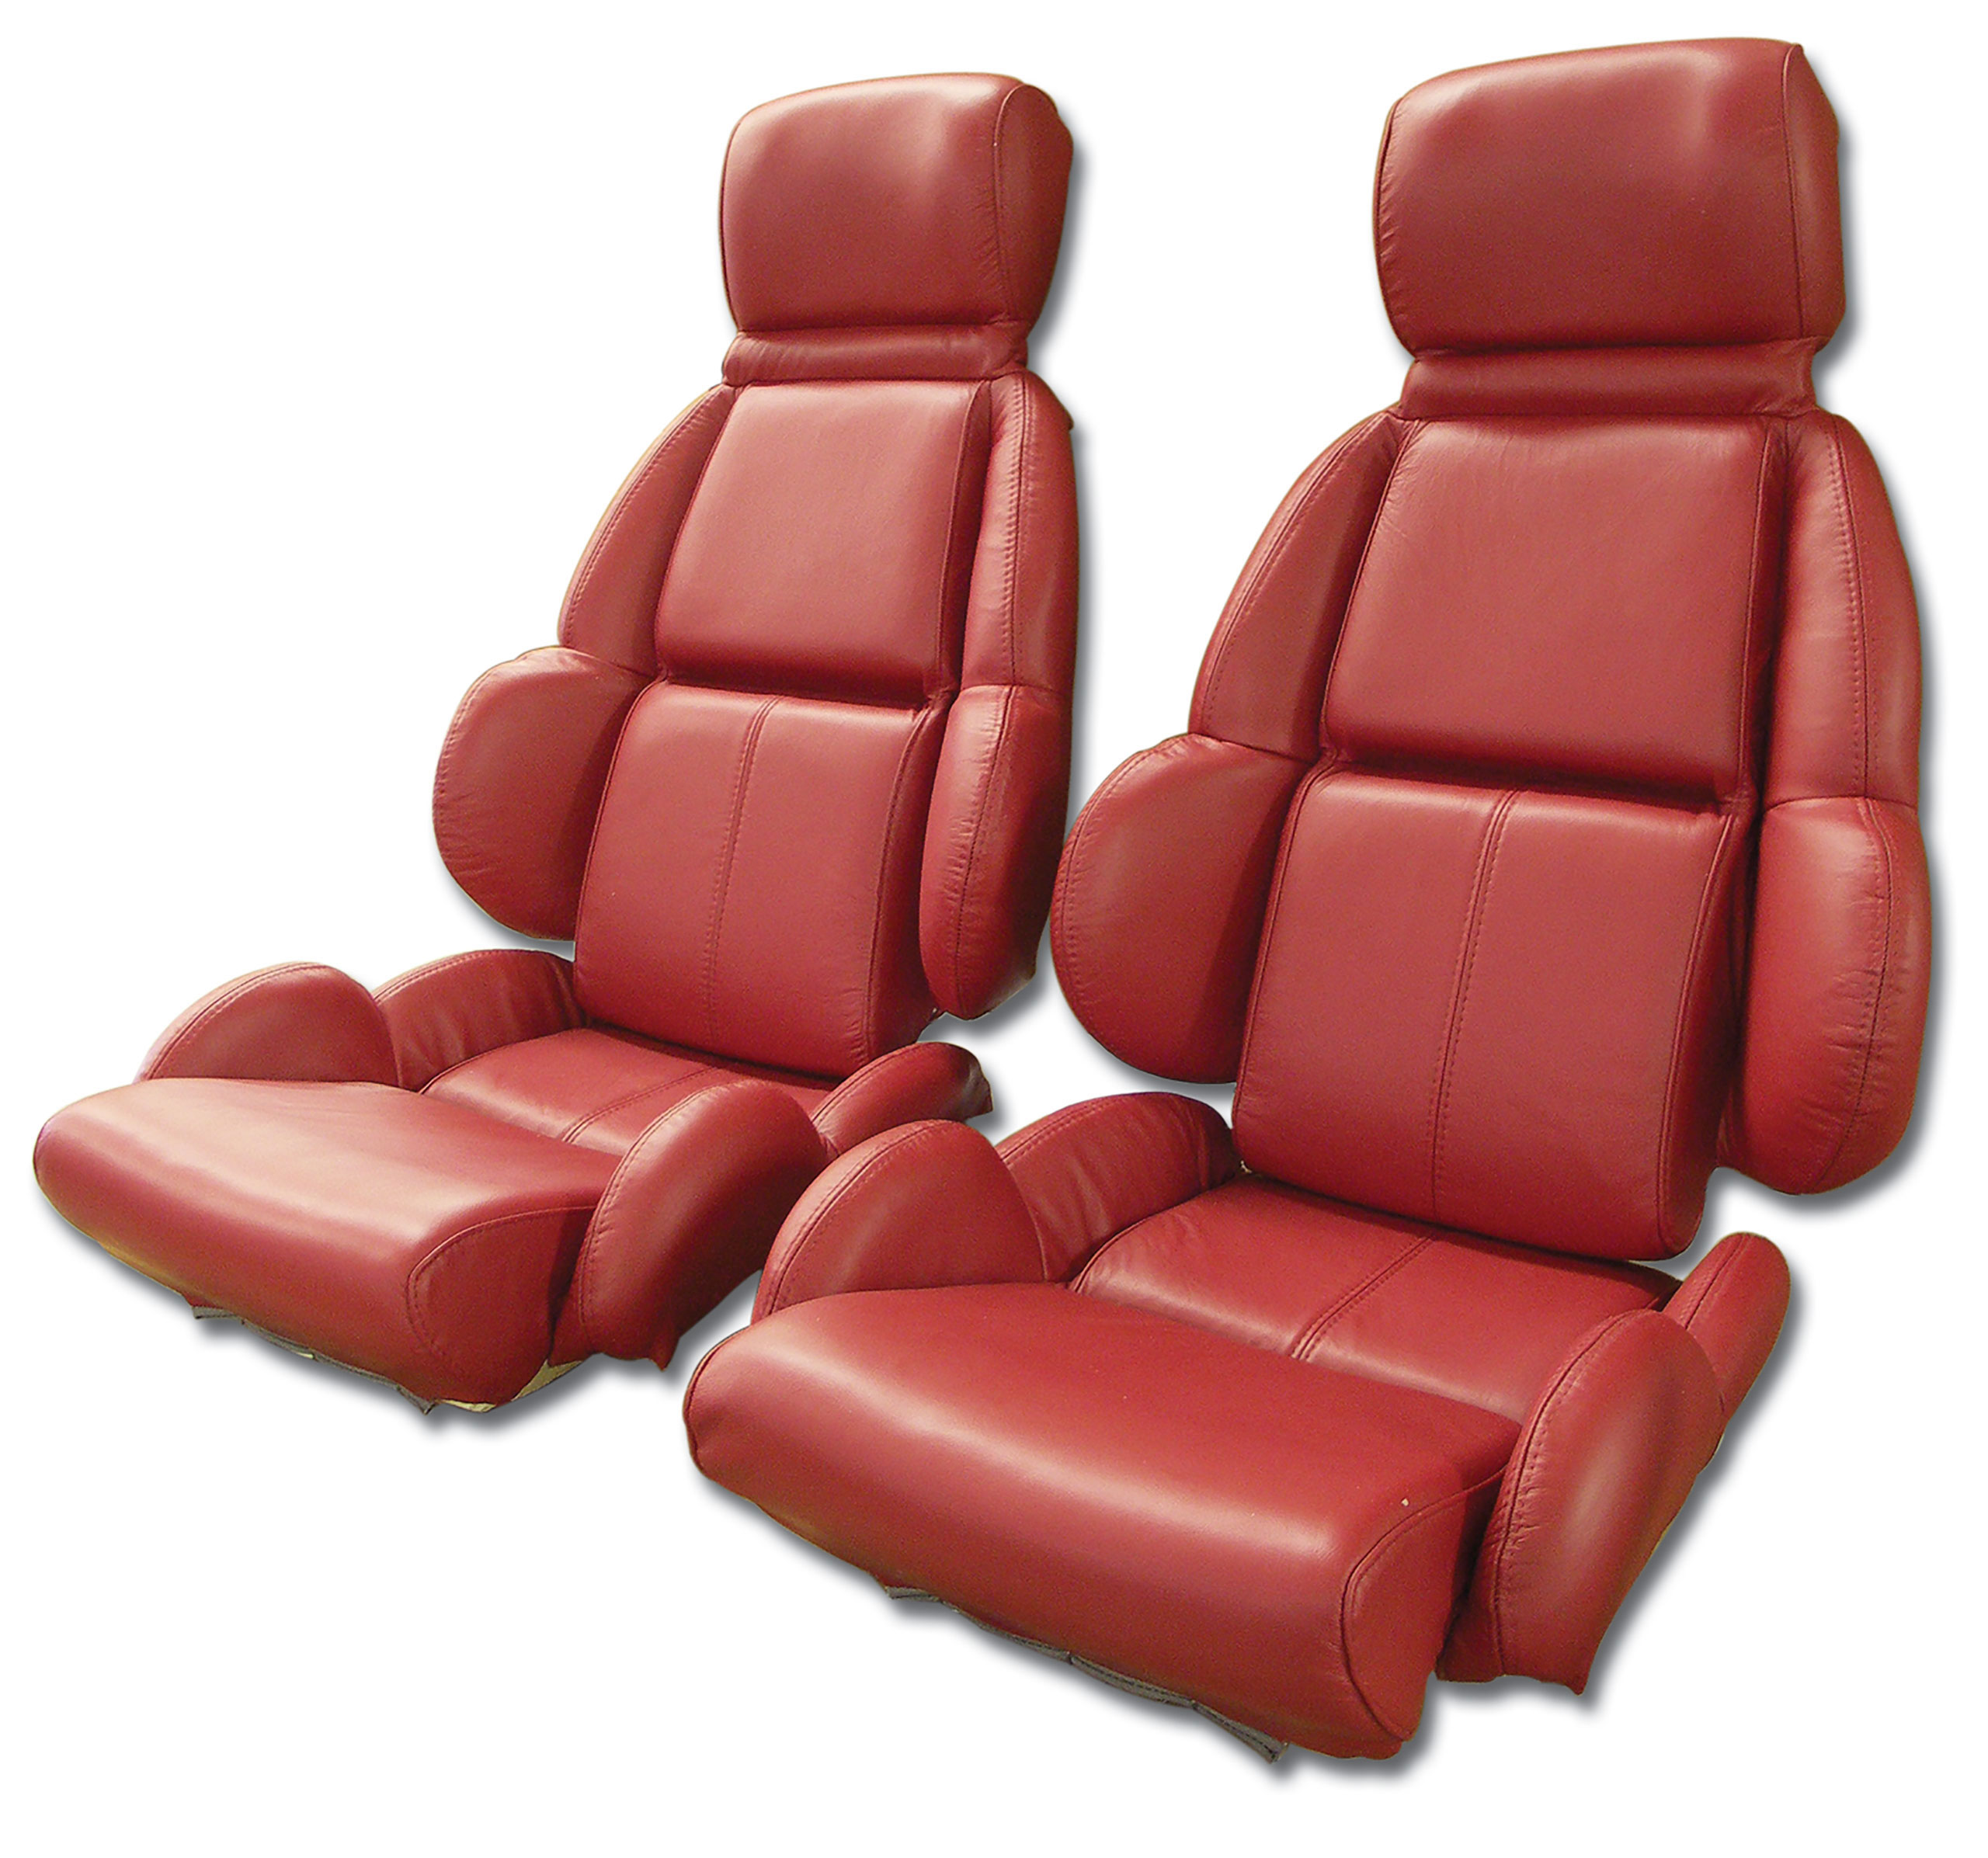 1989-1992 Corvette C4 Leather Seat Covers- Red Standard CA-420475